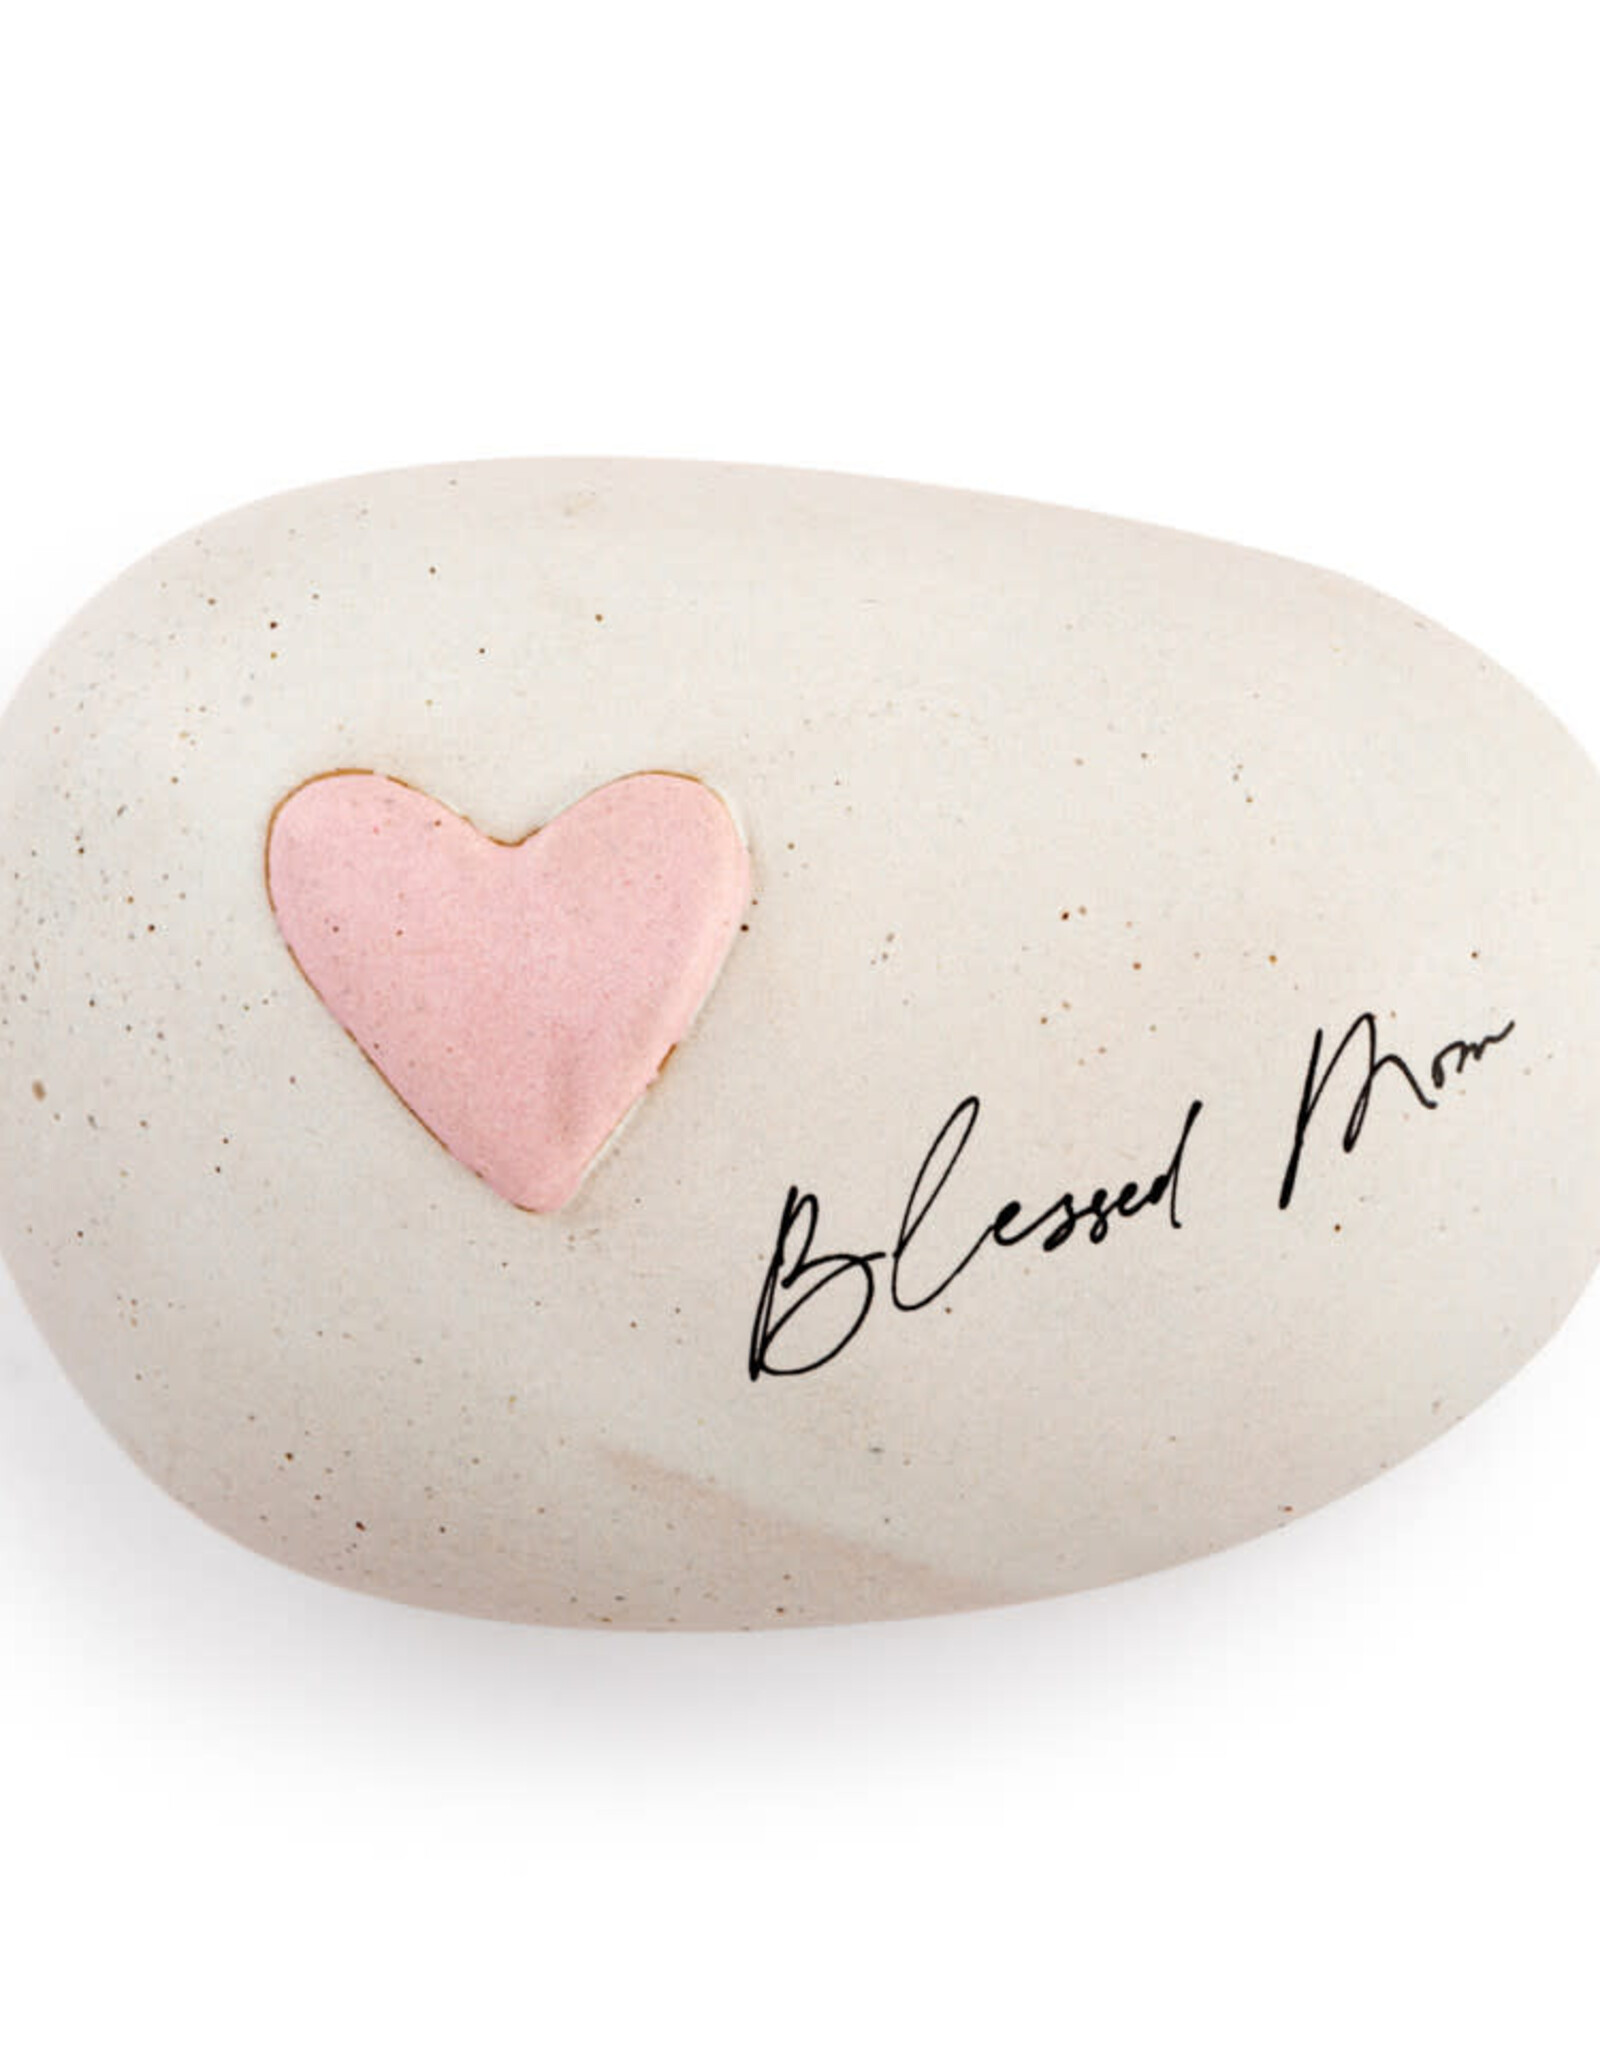 Demdaco INSPIRED STONE - thoughtful messages